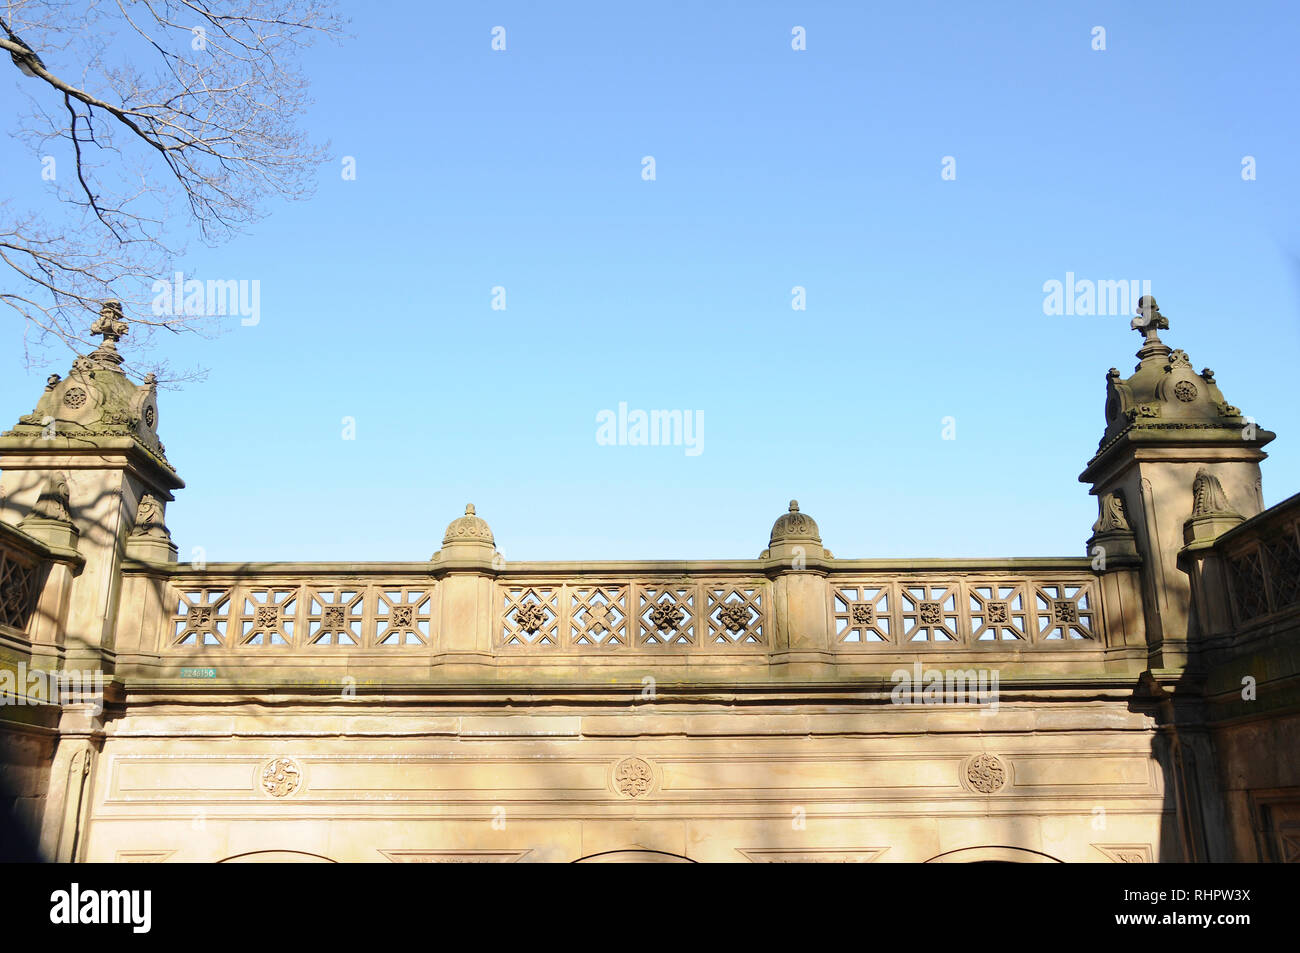 A portion of the stylish art deco and beaux art balcony architecture of the Bethesda fountain garden in New York City's iconic Central Park. Stock Photo